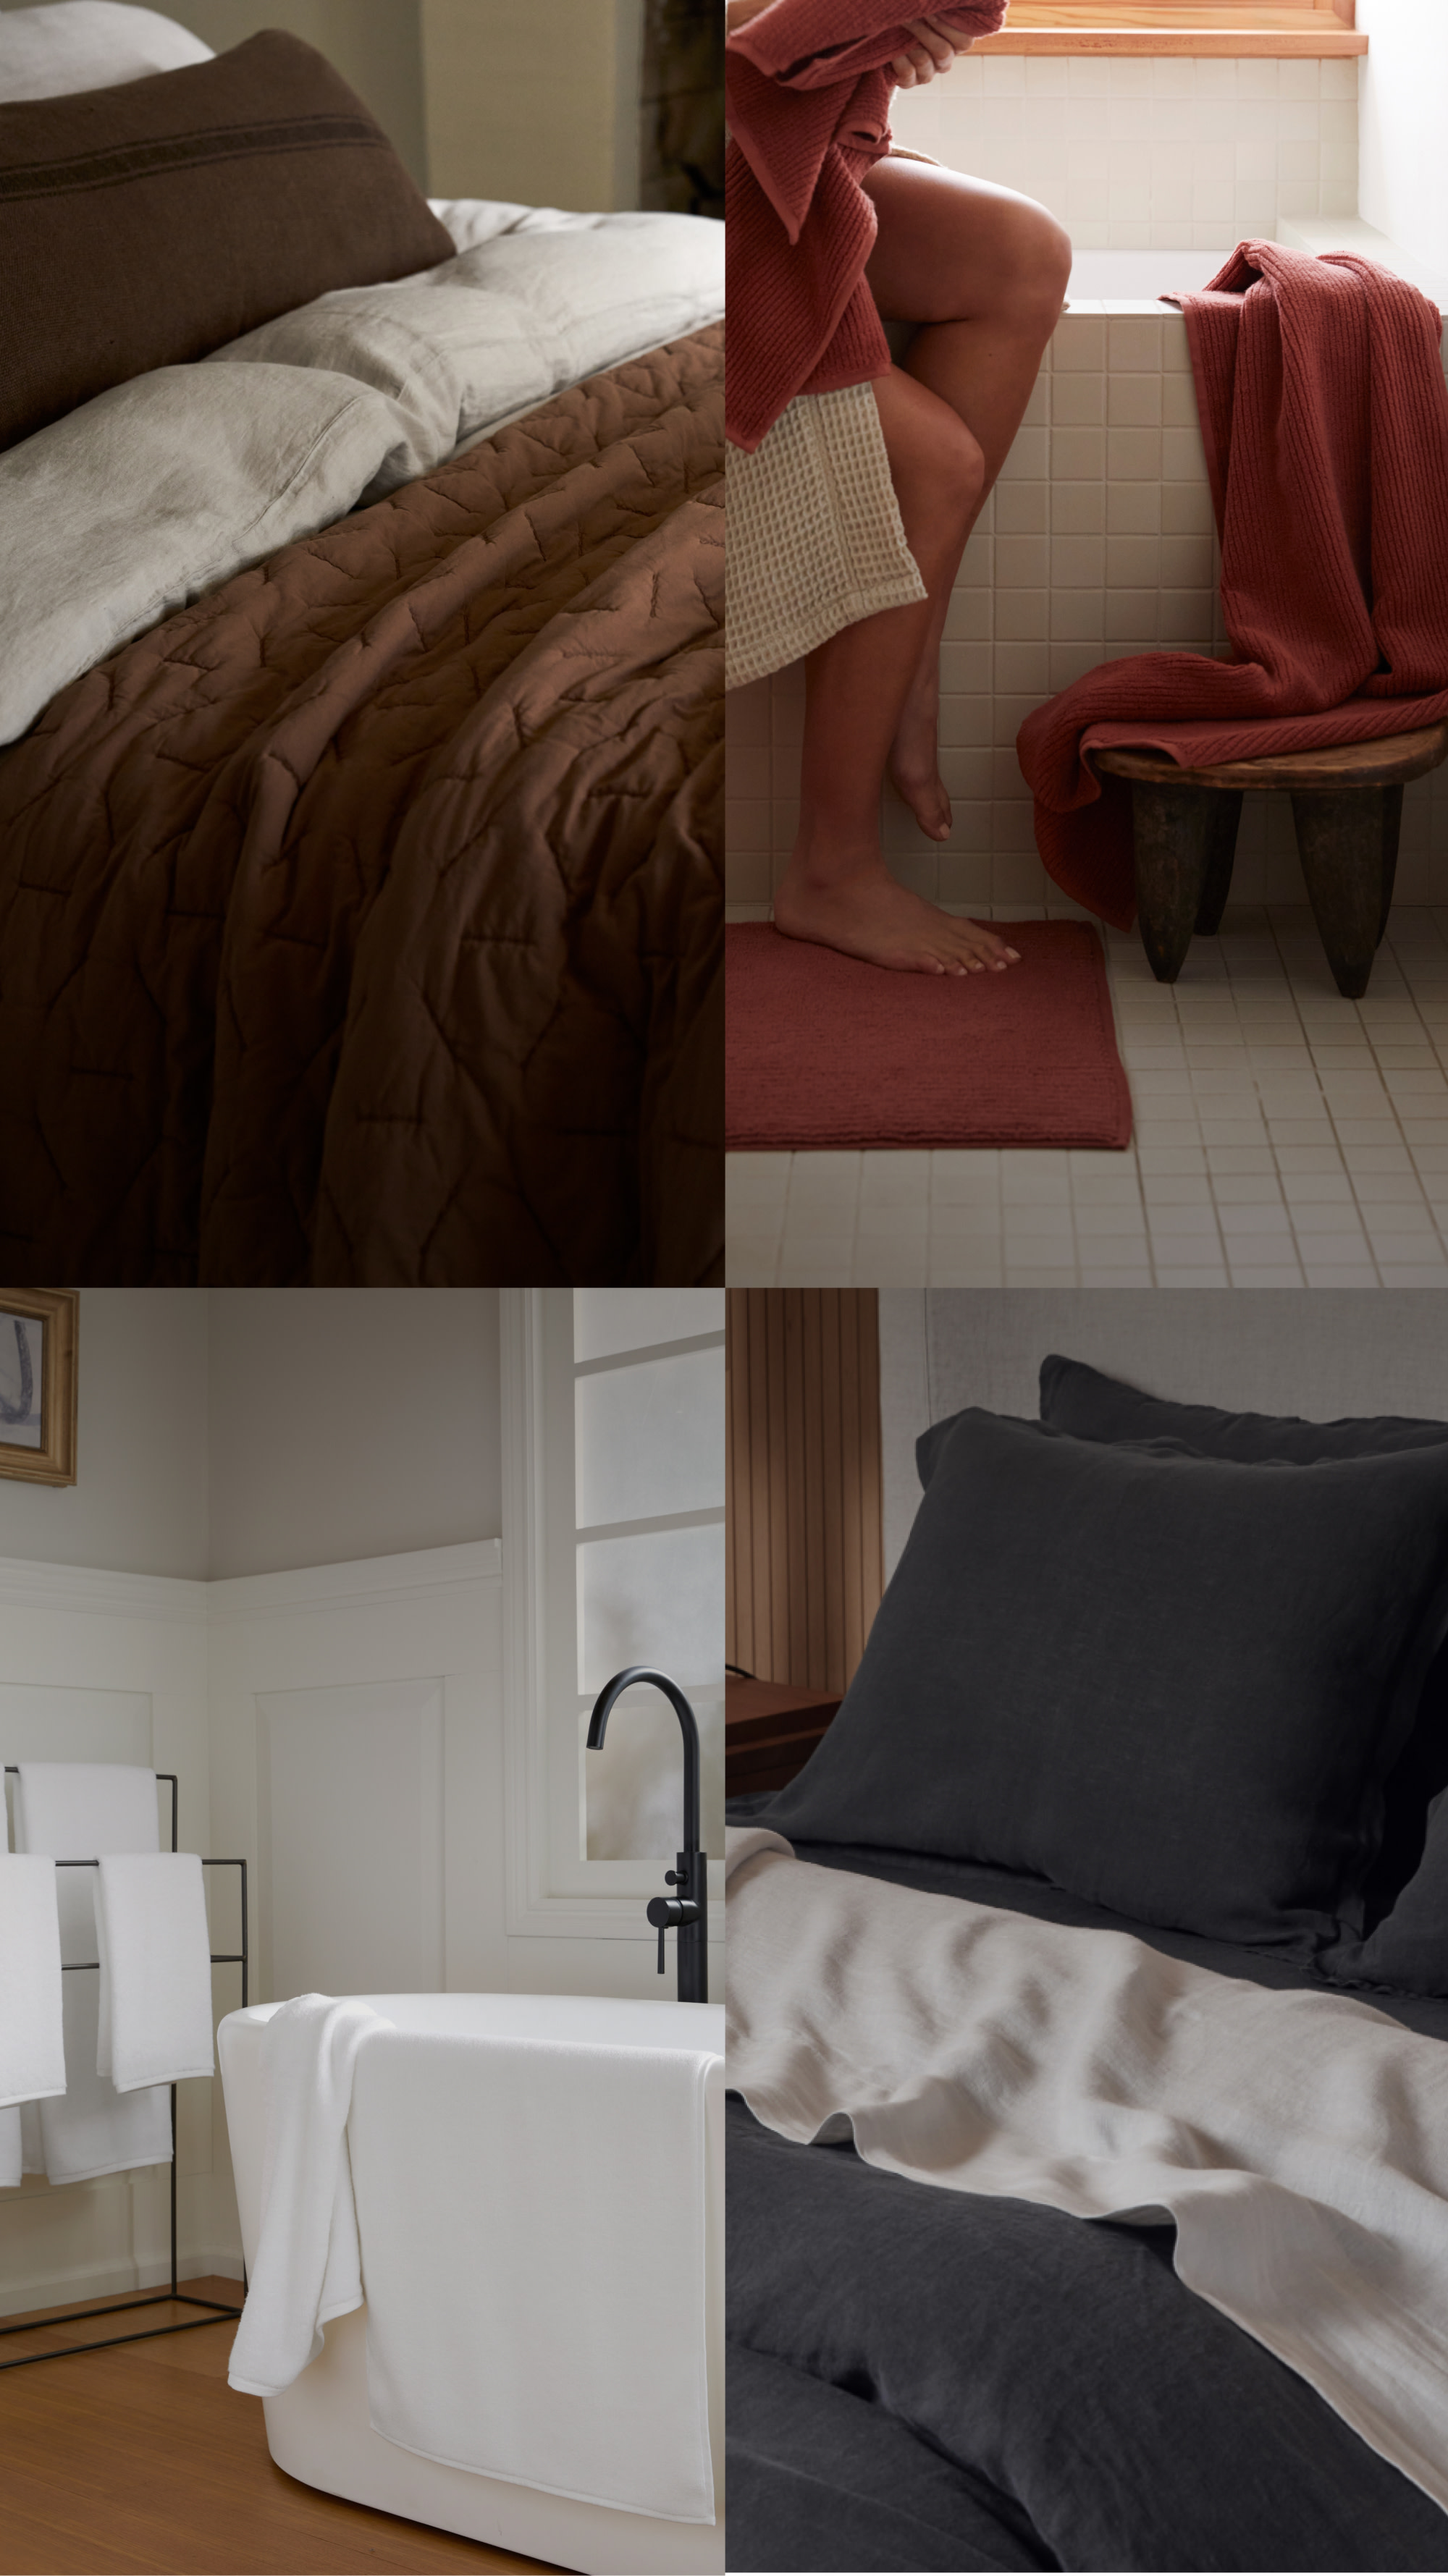 a composite image of 4 images featuring brown quilt, red towels, white towels, and black linen